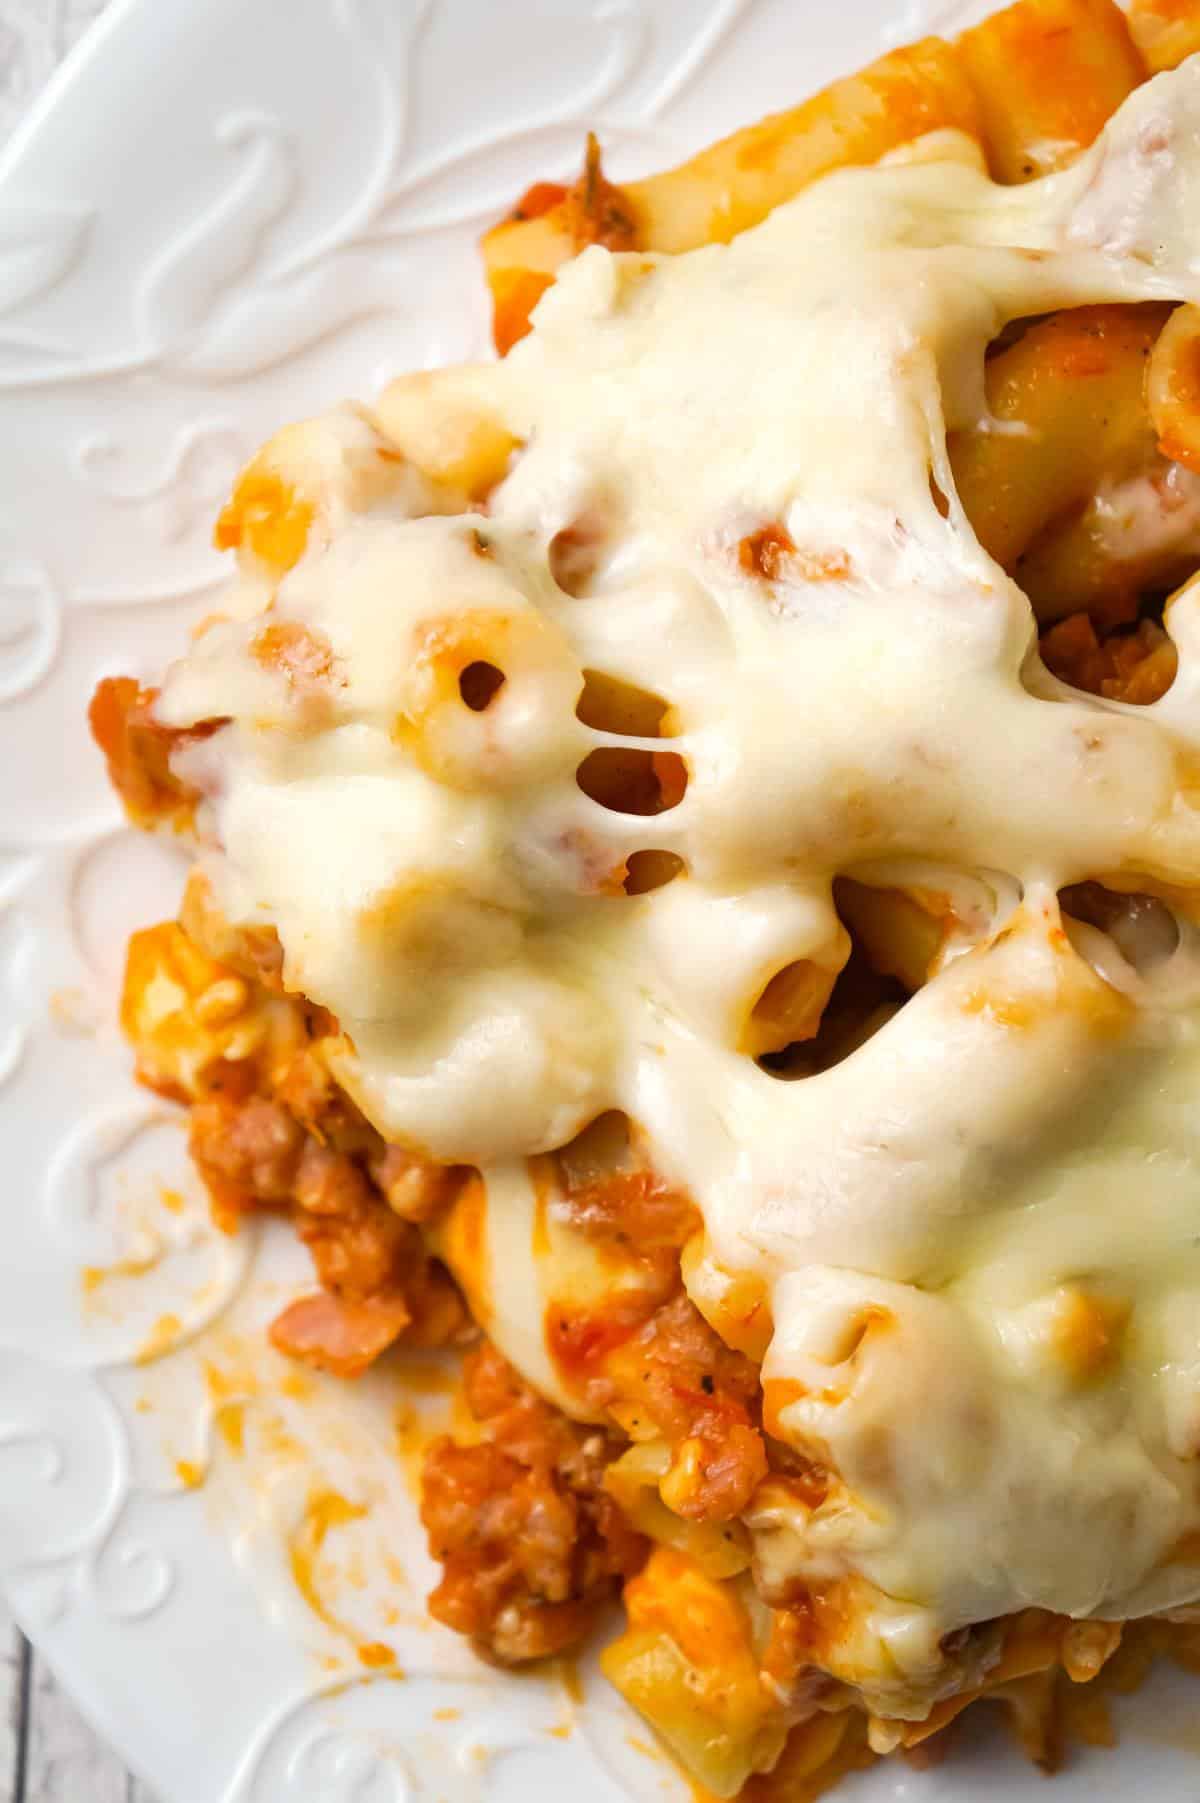 Baked Ziti with Sausage is an easy pasta recipe loaded with crumbled Italian sausage meat, marinara sauce, chunks of string cheese and shredded mozzarella.